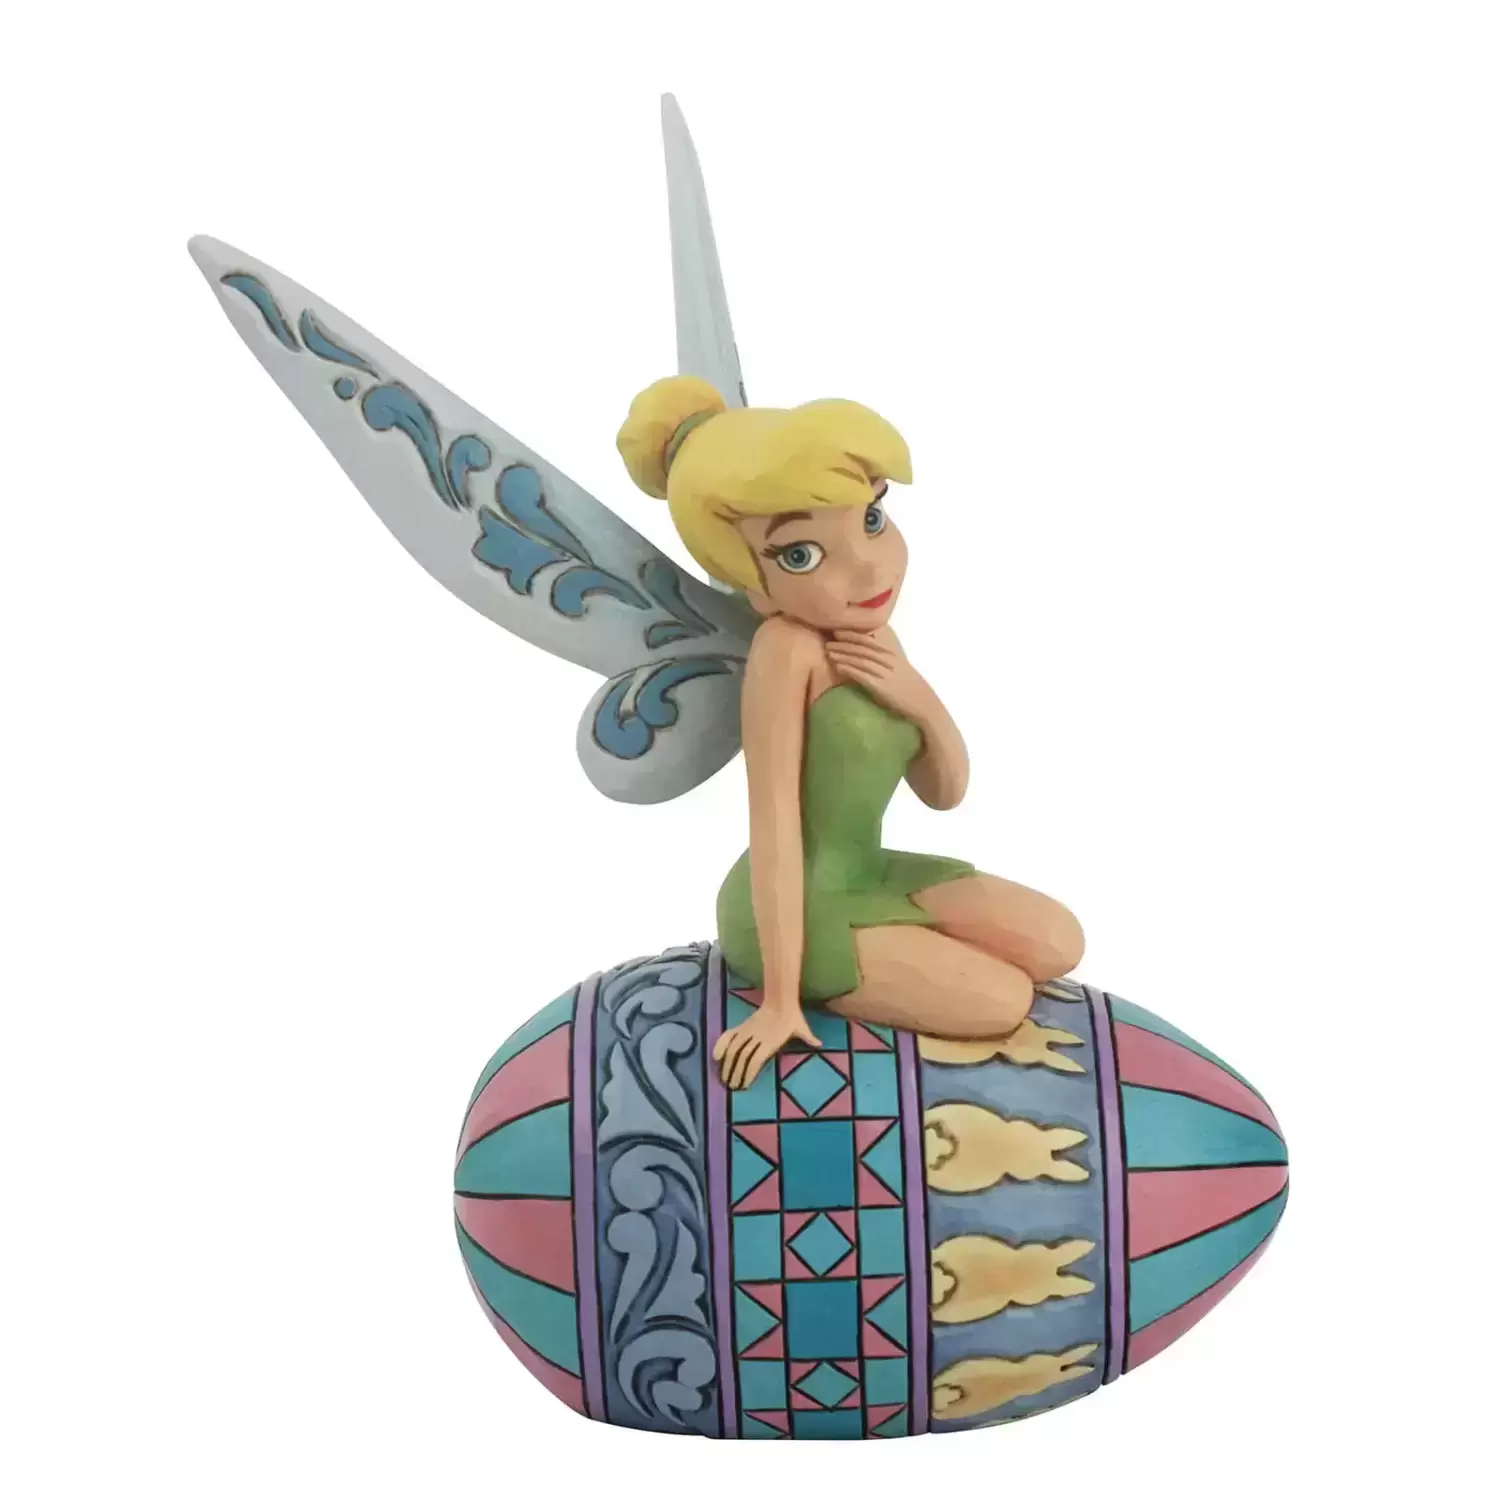 Disney Traditions by Jim Shore - Easter Tinker bell Figurine